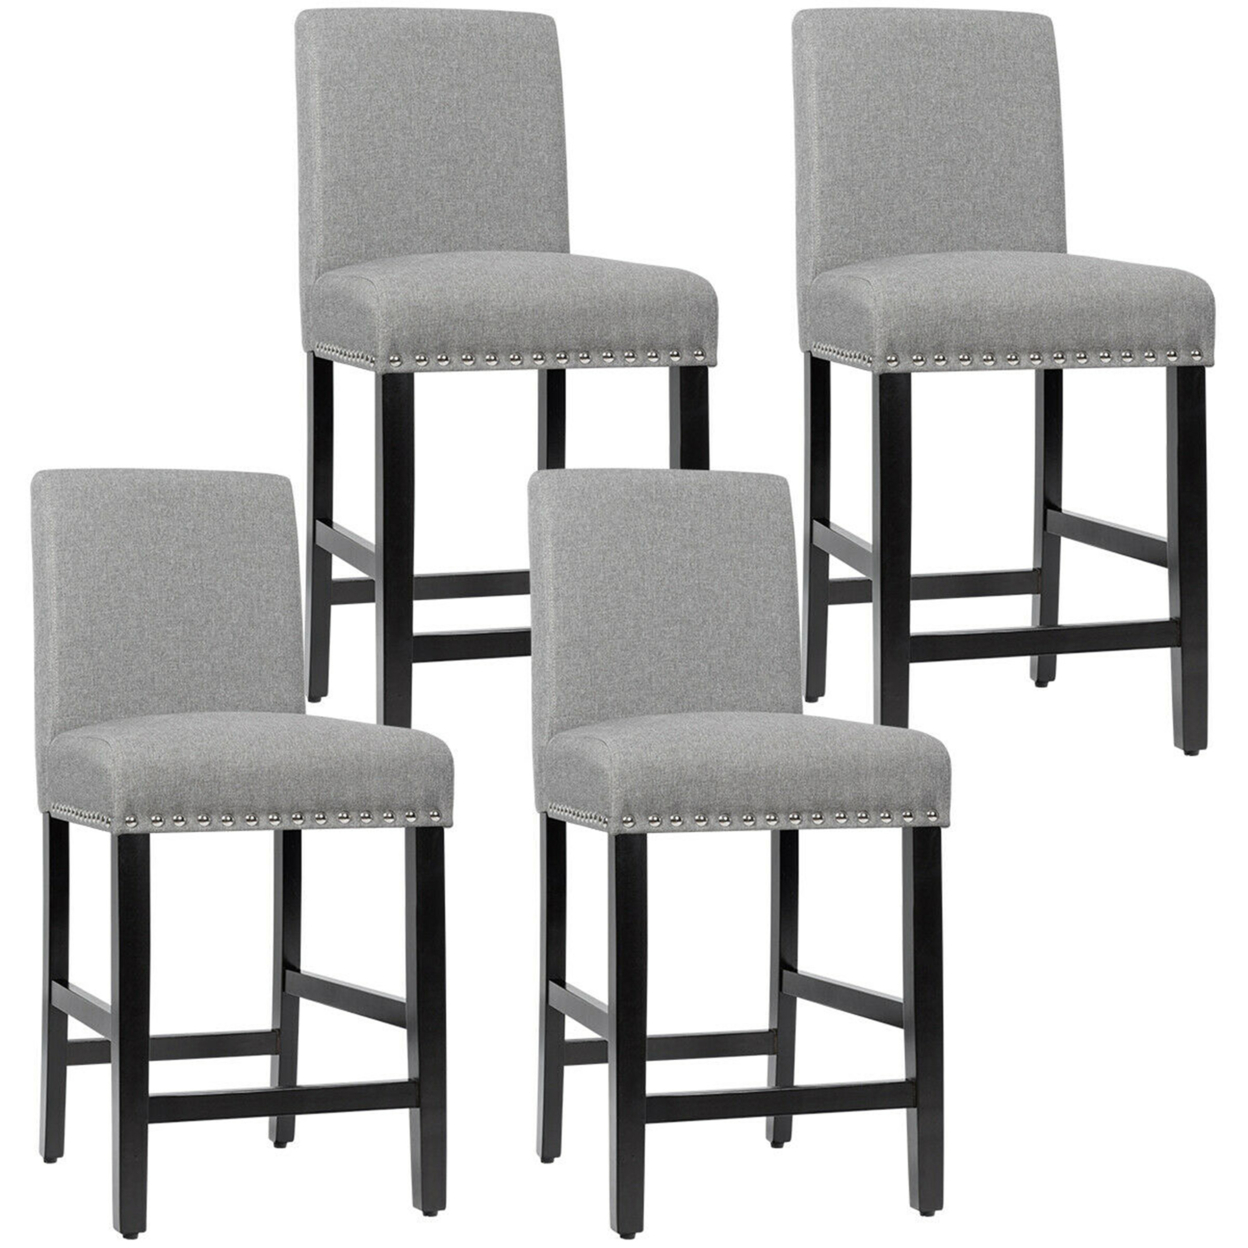 4PCS Upholstered Counter Stools Bar Stool Home Kitchen W/ Wooden Legs Grey